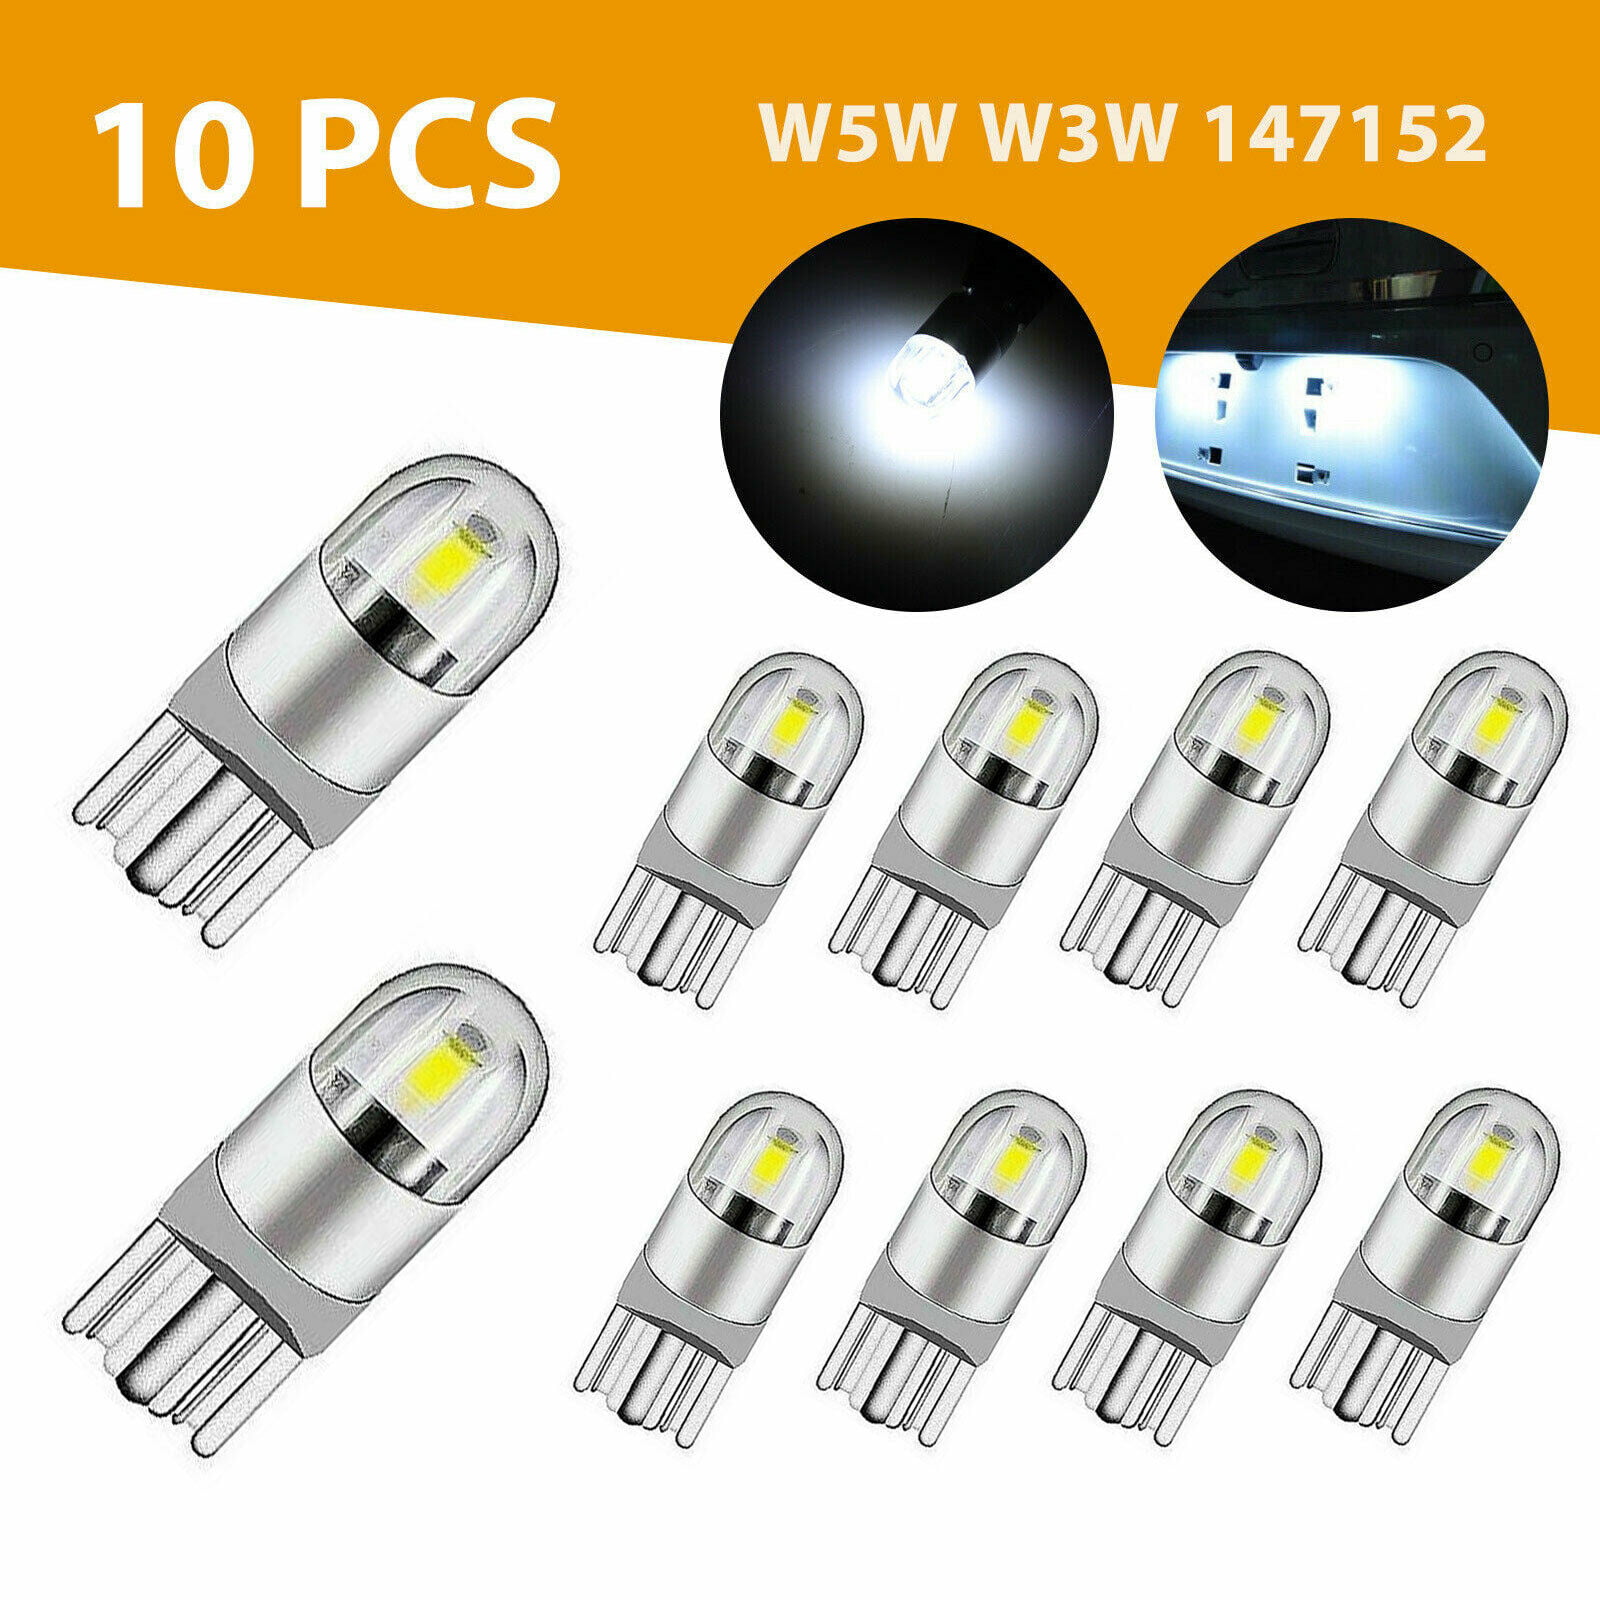 T10 W5W 24 LED SMD Canbus Error Free 6000k HID Bright White Bulbs Parking Lights